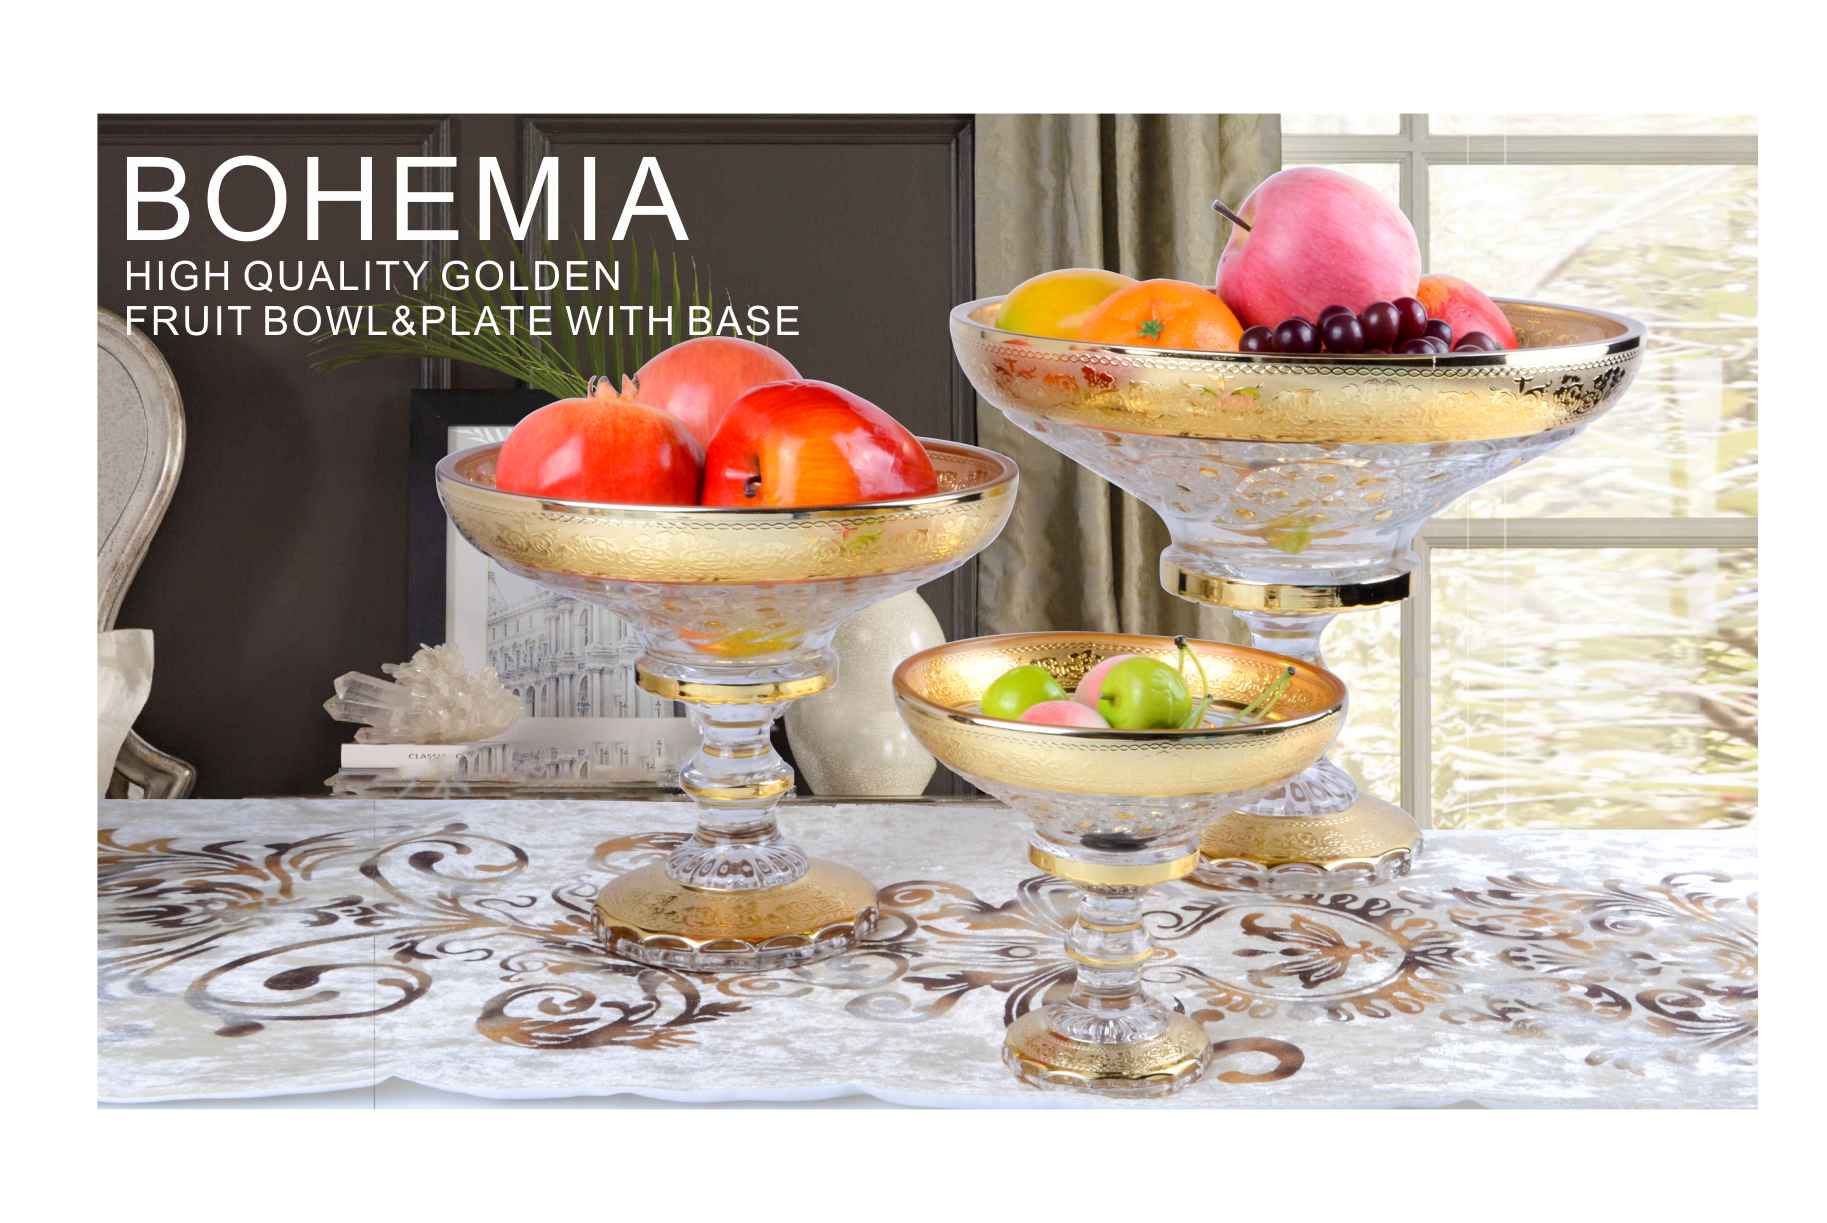 HIGH QUALITY GOLDEN FRUIT BOWL&PLATE WITH BASE